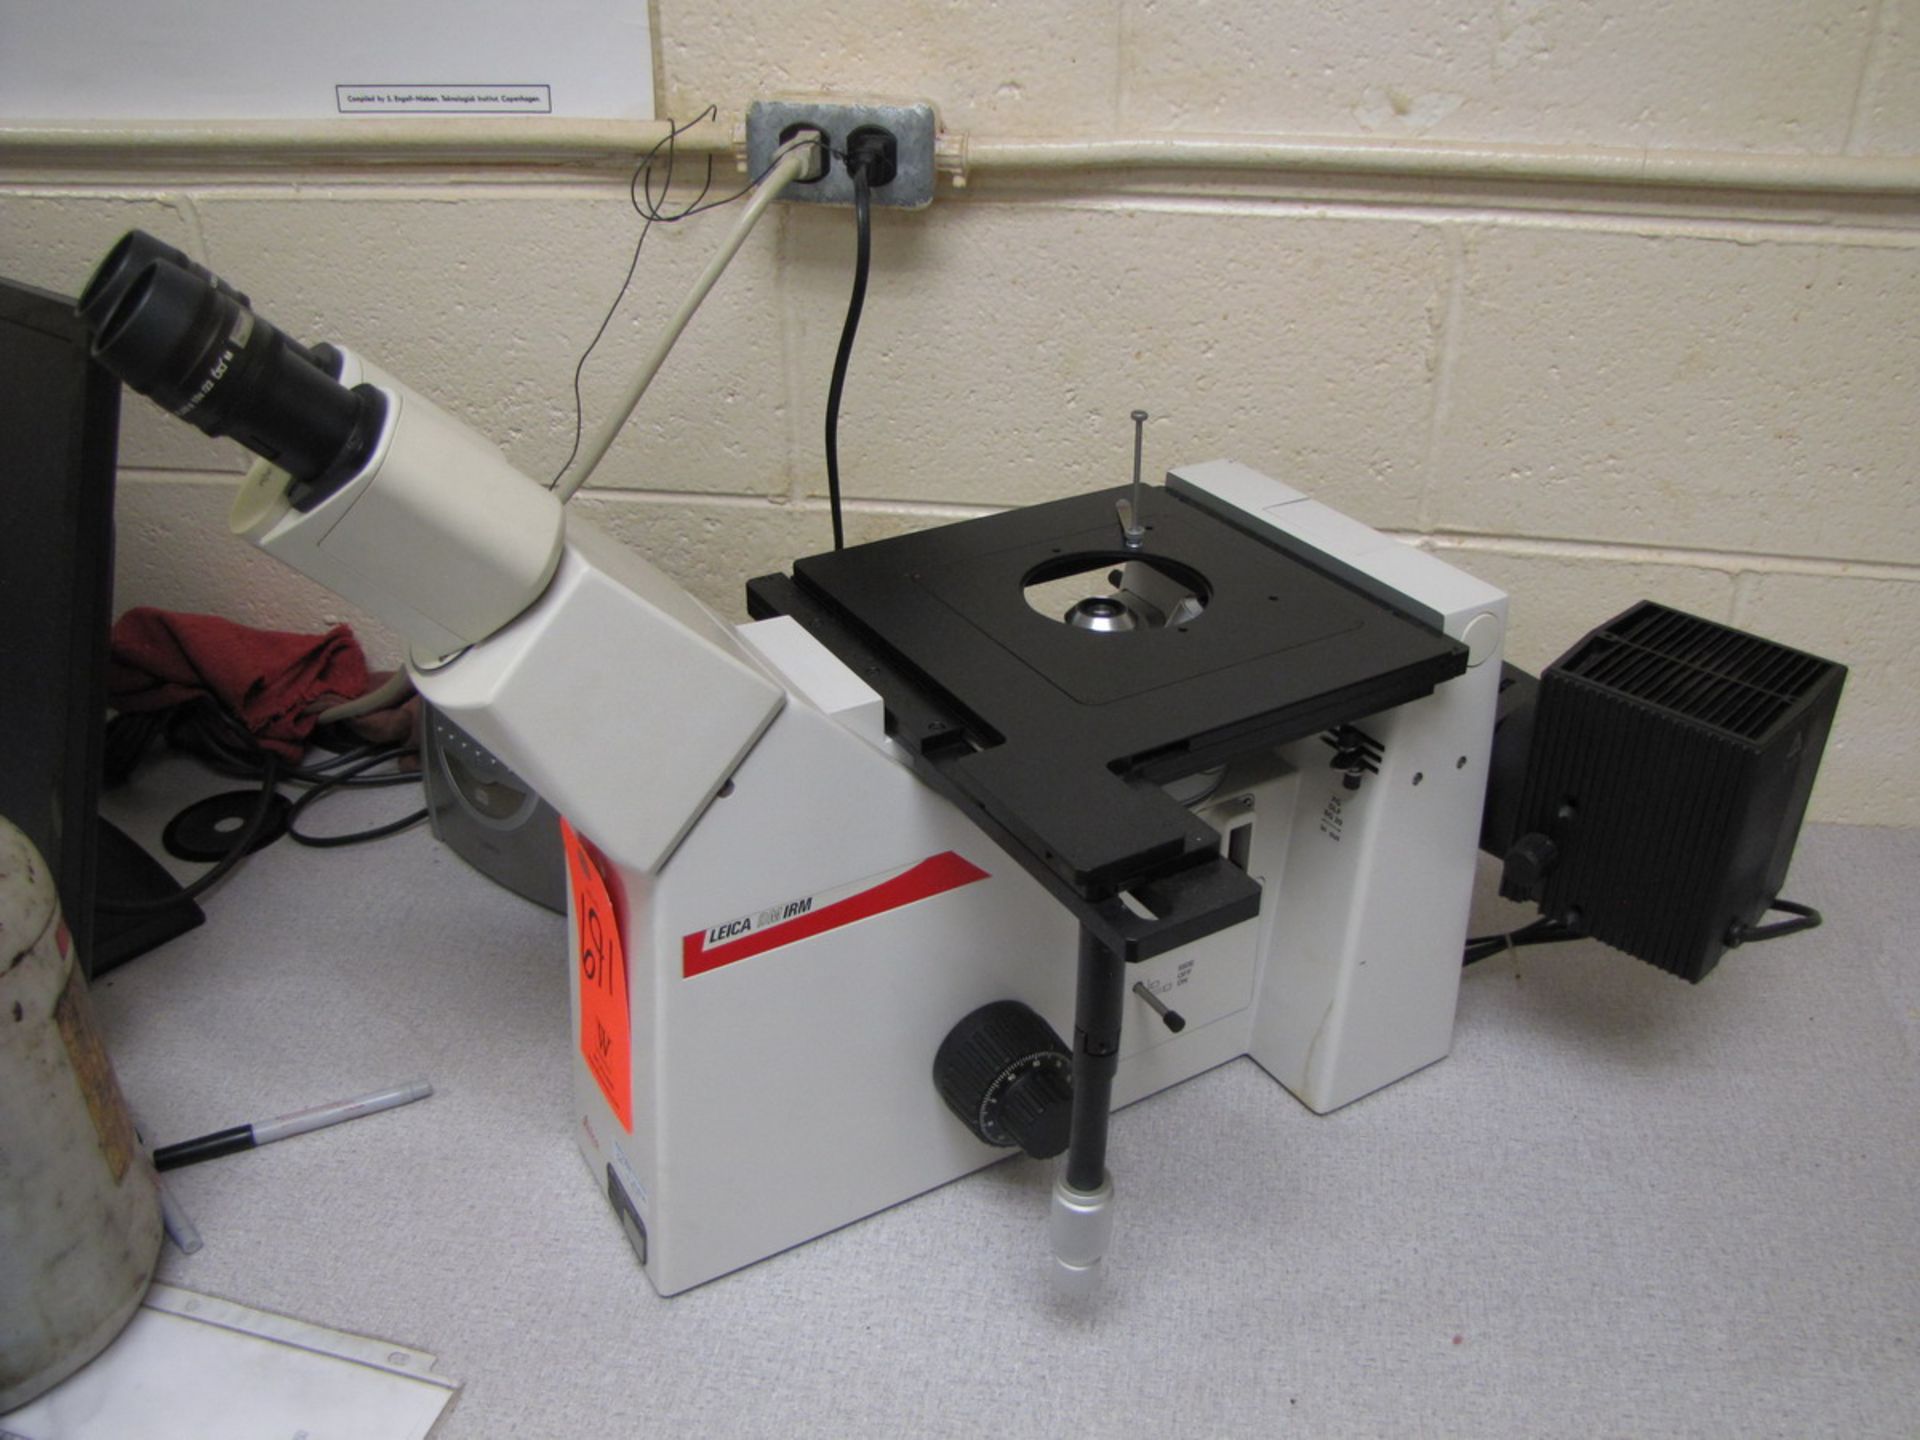 Leica Model DMIRM Microscope, with (2) 10X/22 Eyepieces, 5X, 10X, 50X, 100X Objectives, Paxcam - Image 2 of 2